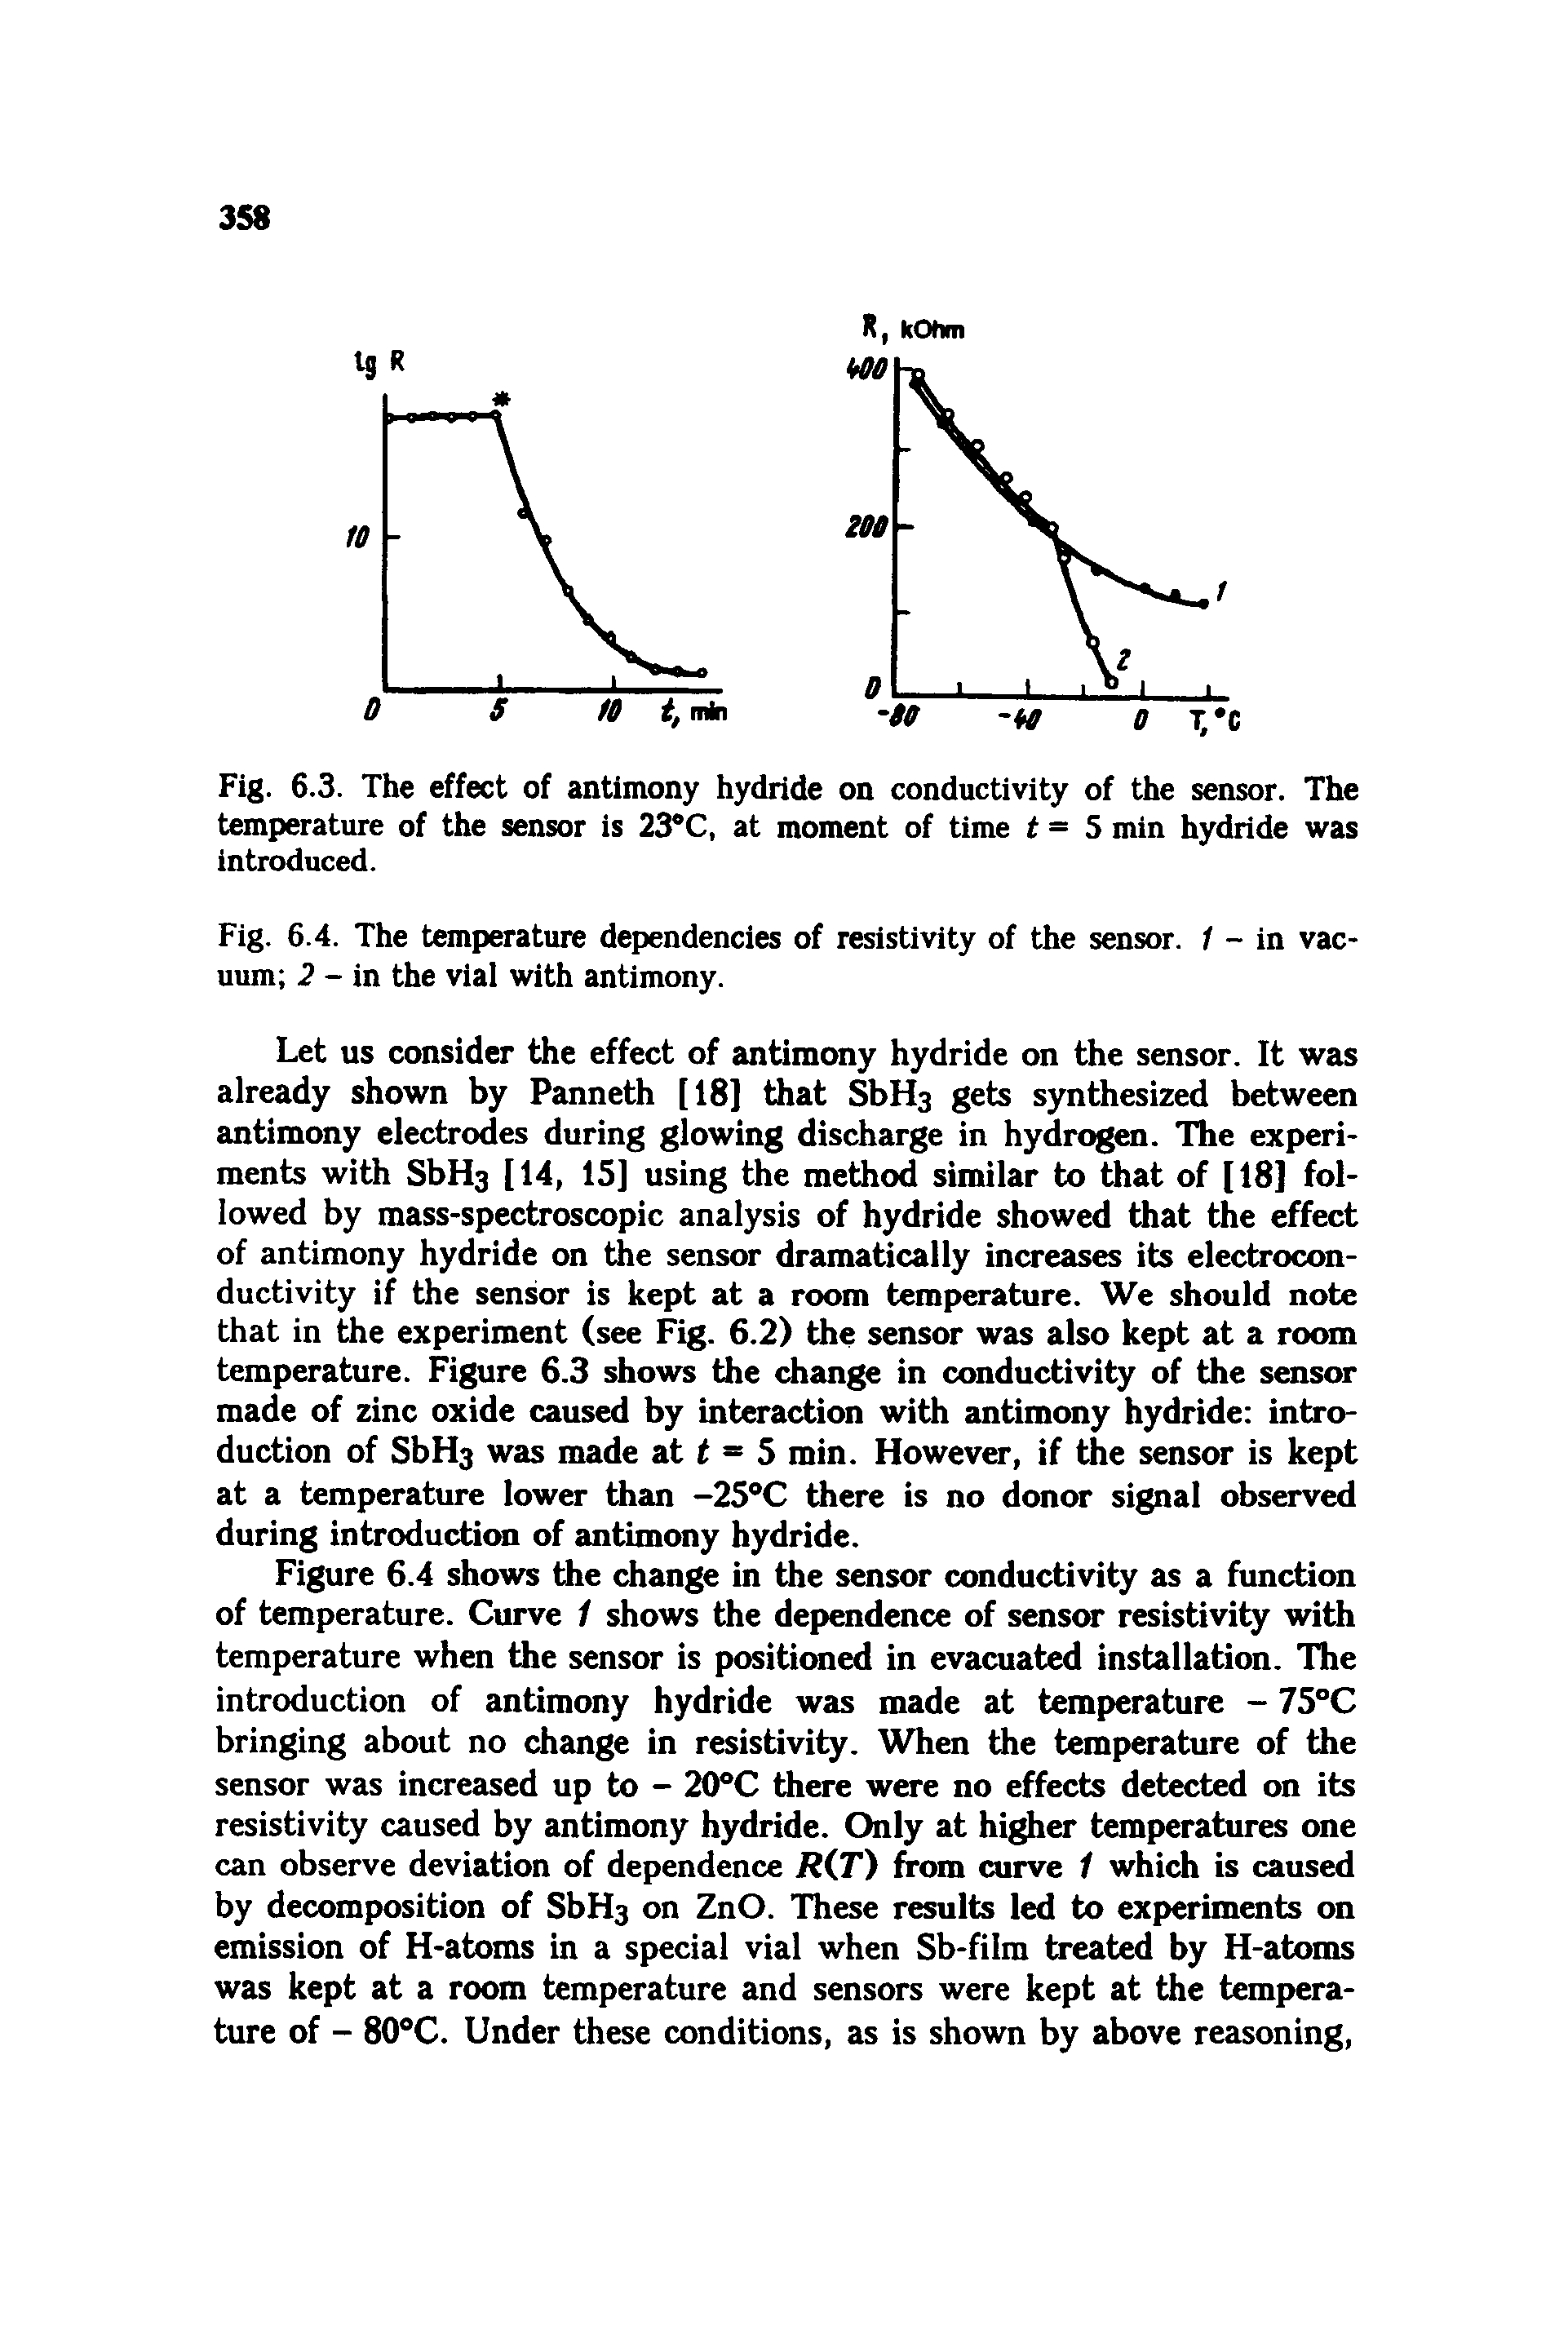 Fig. 6.3. The effect of antimony hydride on conductivity of the sensor. The temperature of the sensor is 23 C, at moment of time t= 5 min hydride was introduced.